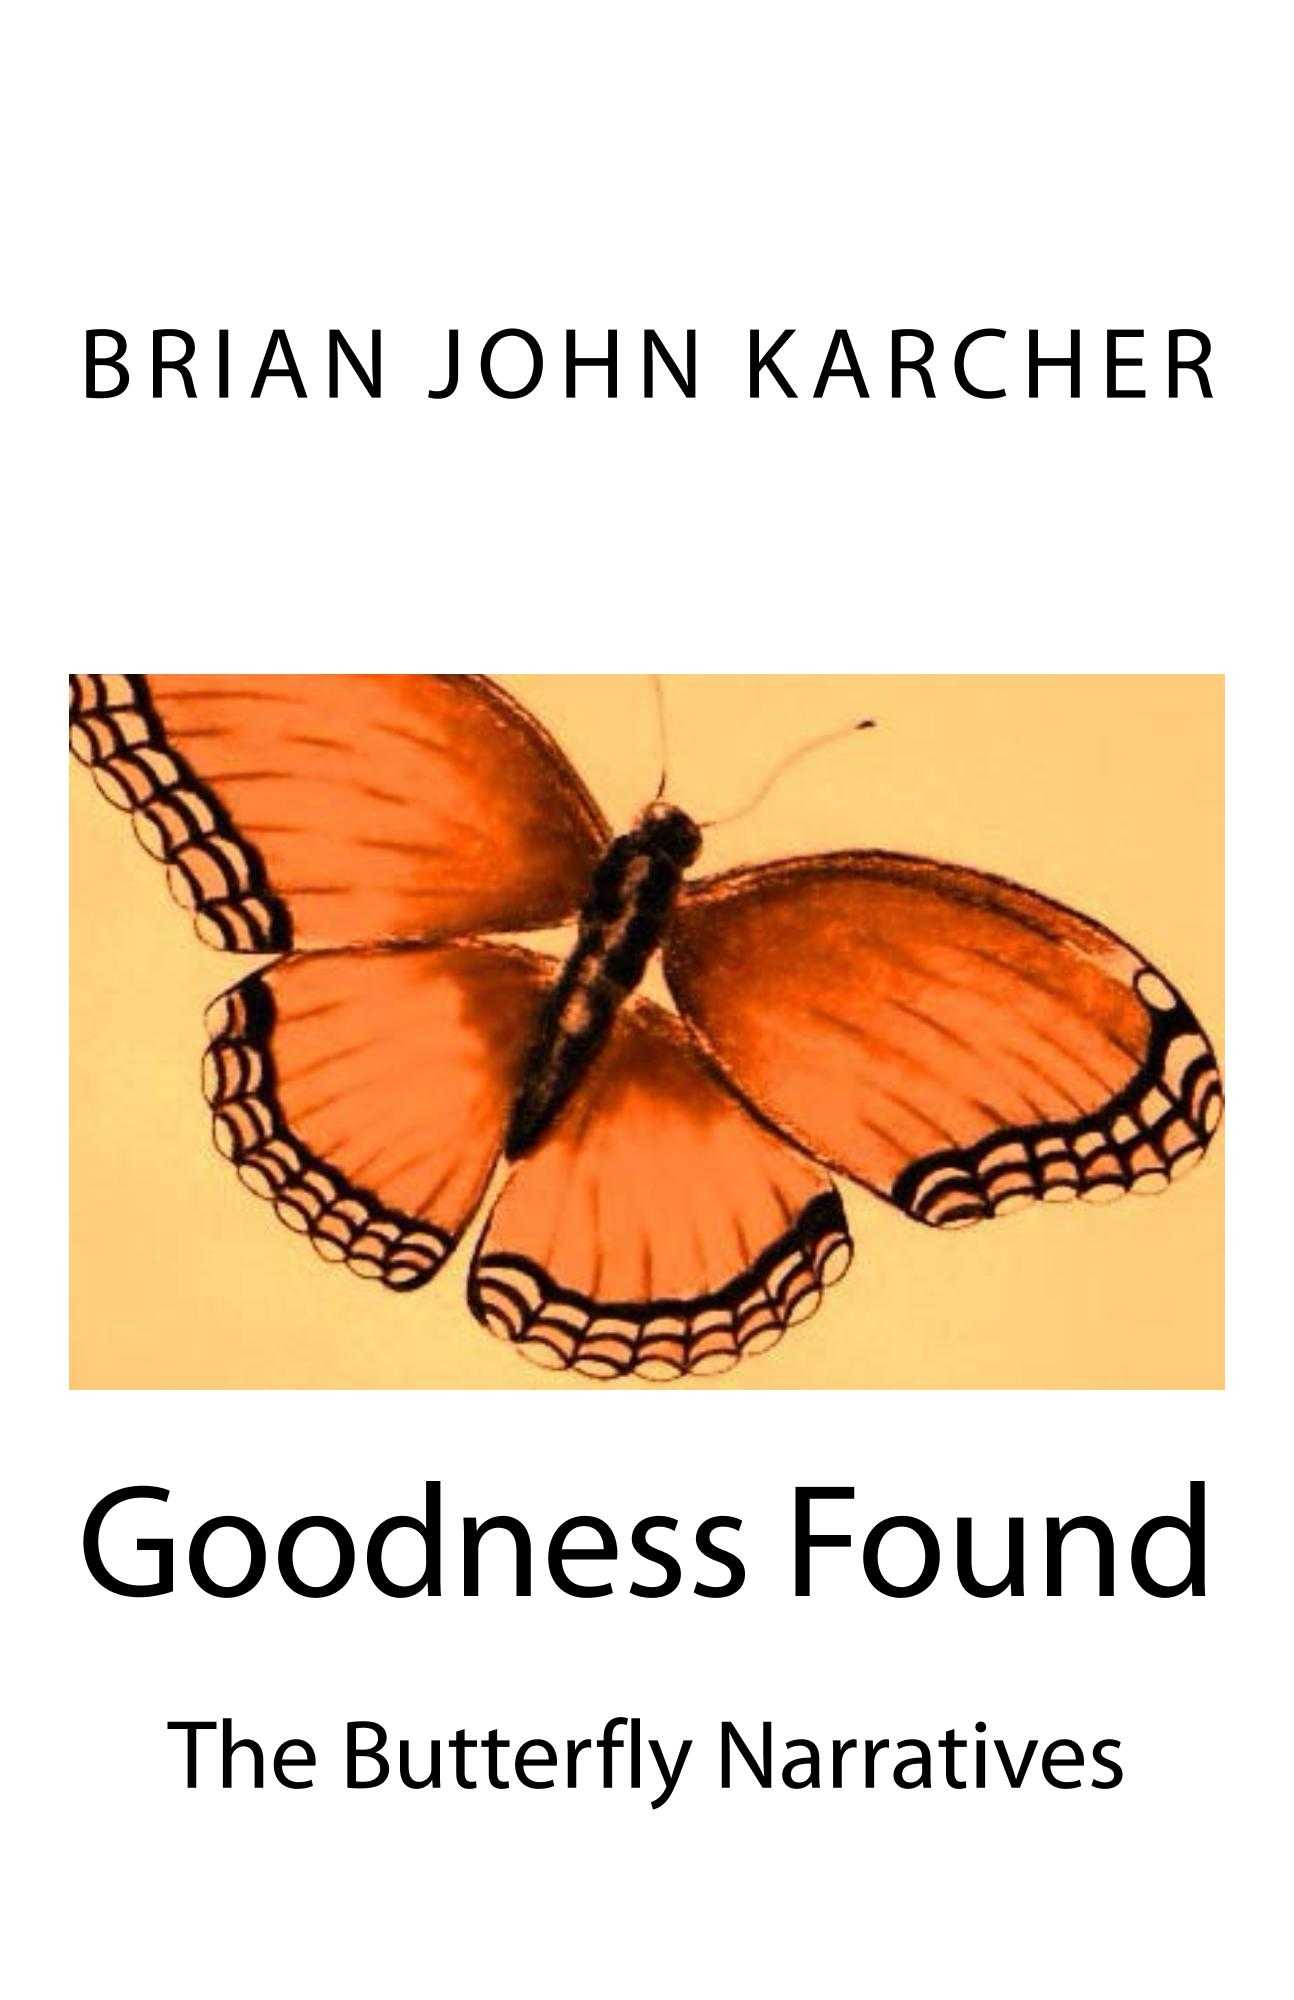 Goodness Found: The Butterfly Narratives